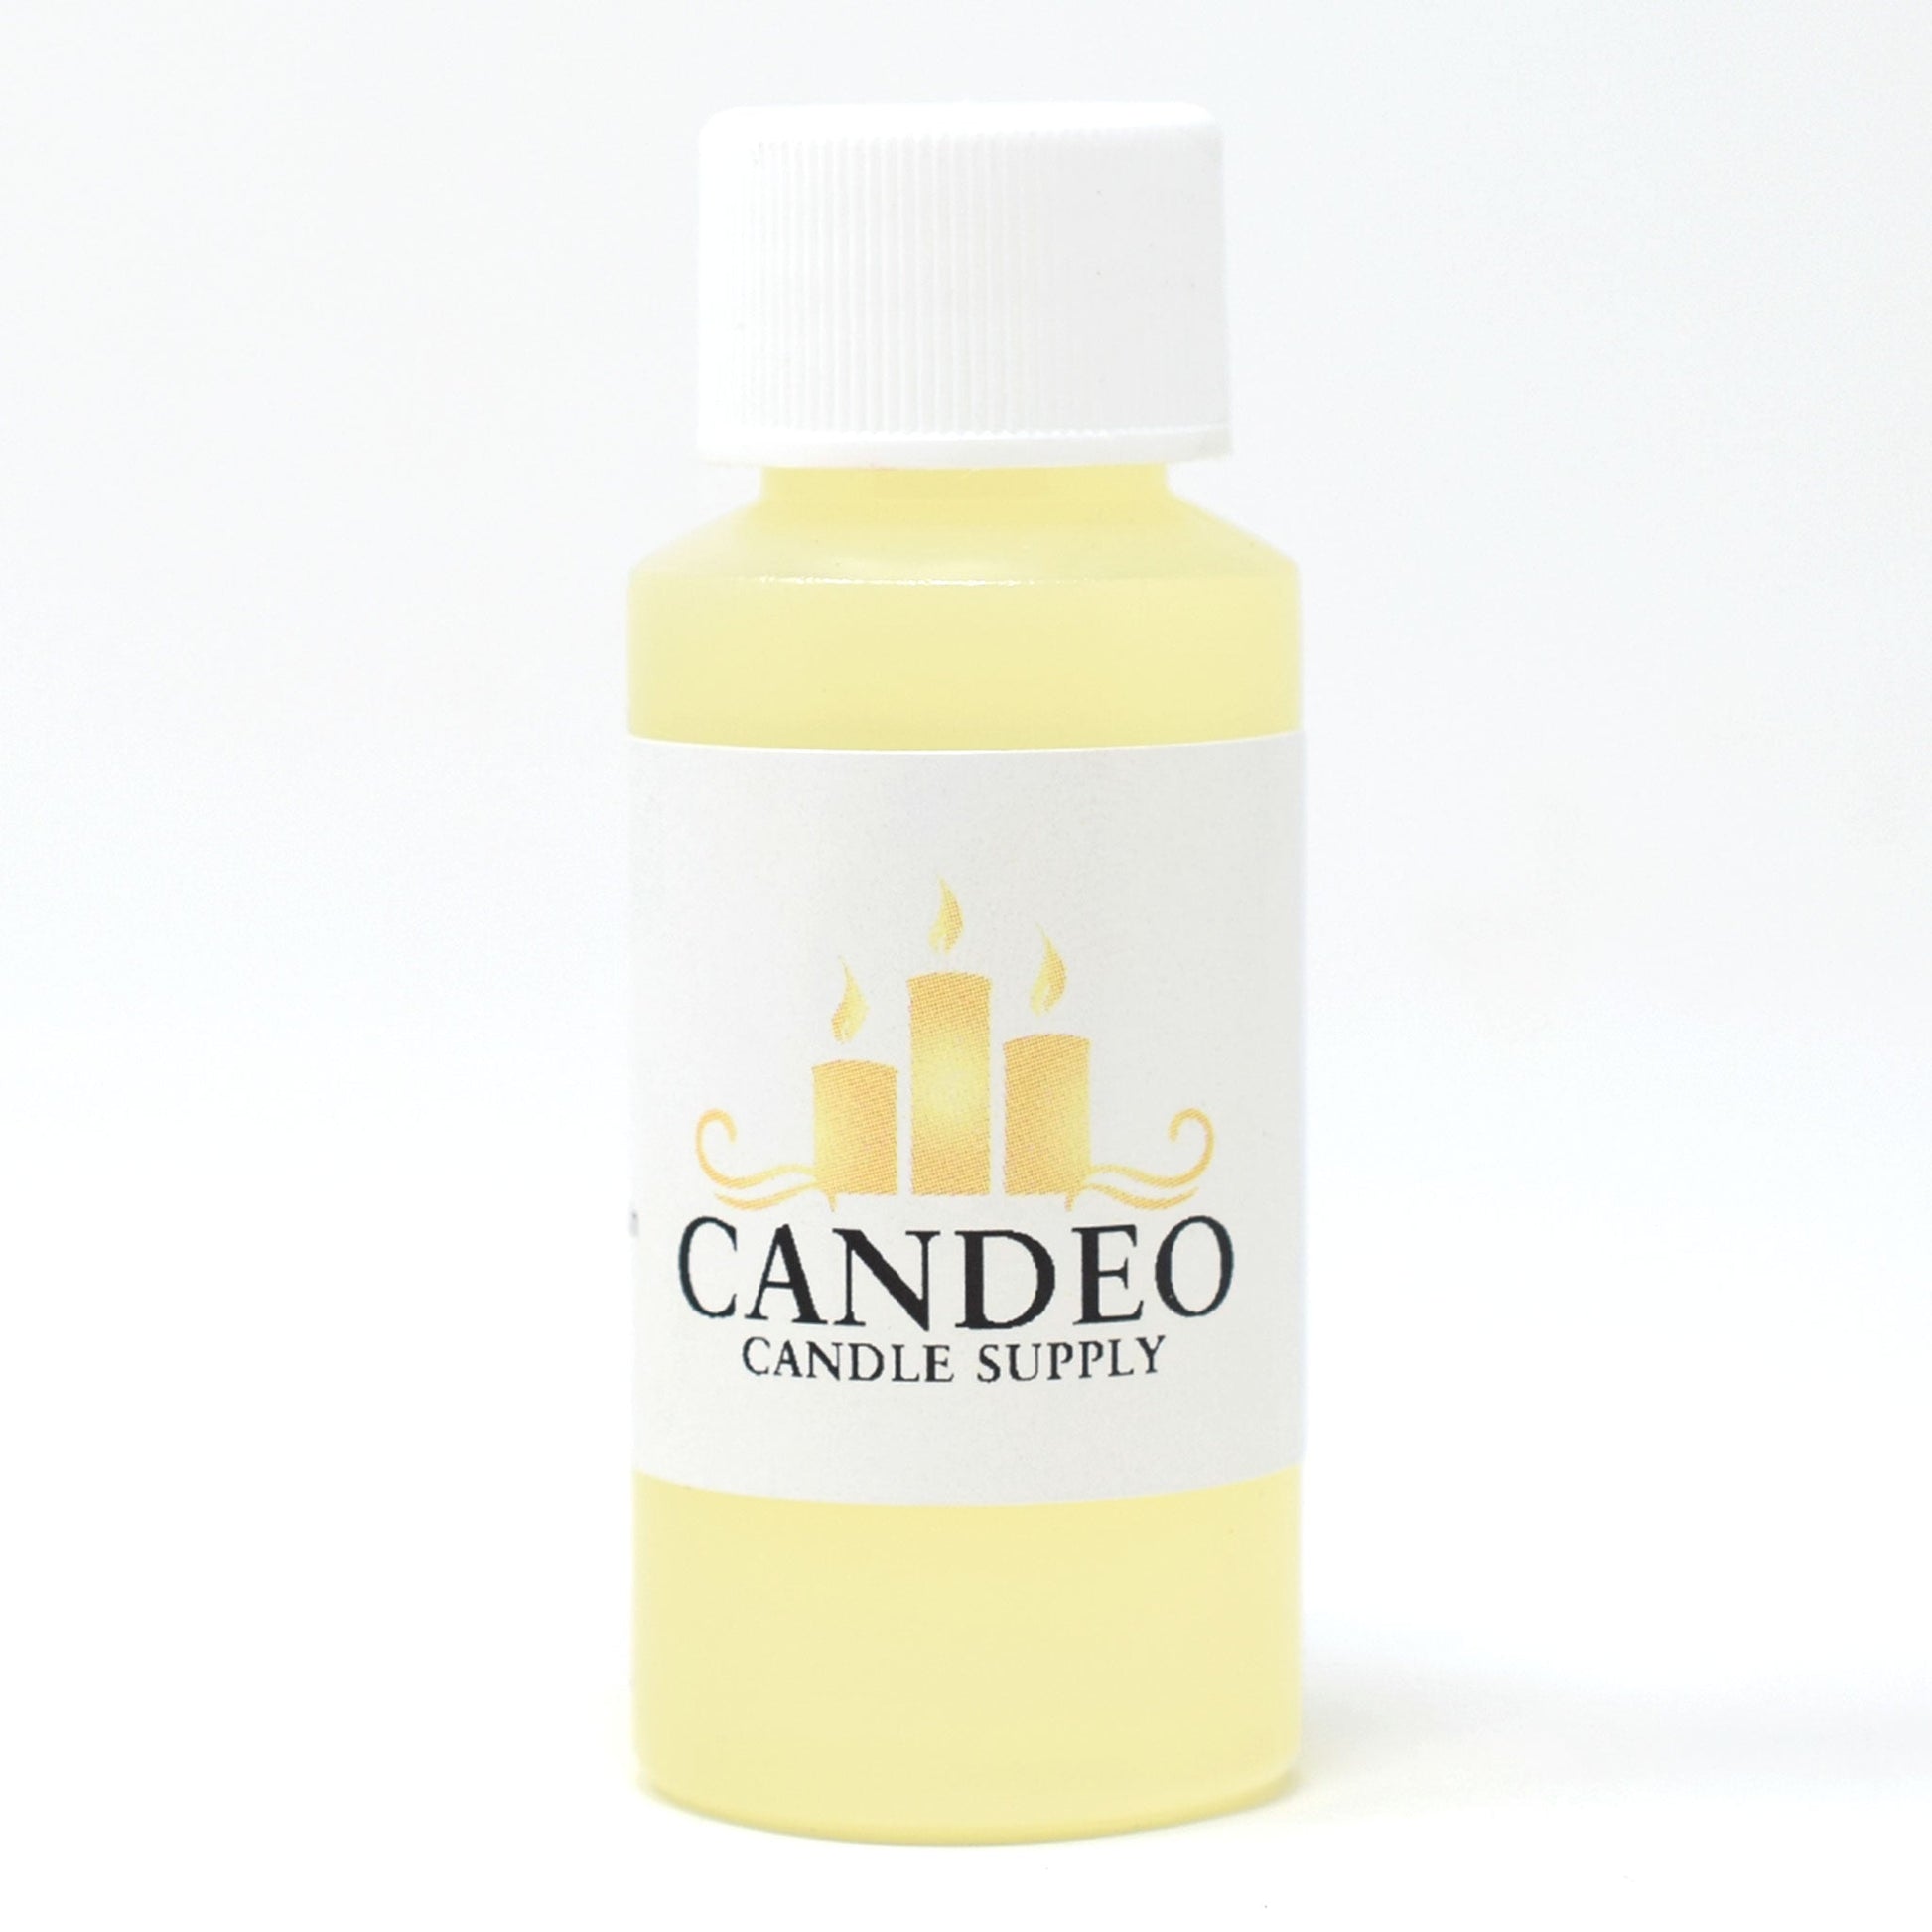 Fireside Embers Fragrance Oil - Candeo Candle Supply